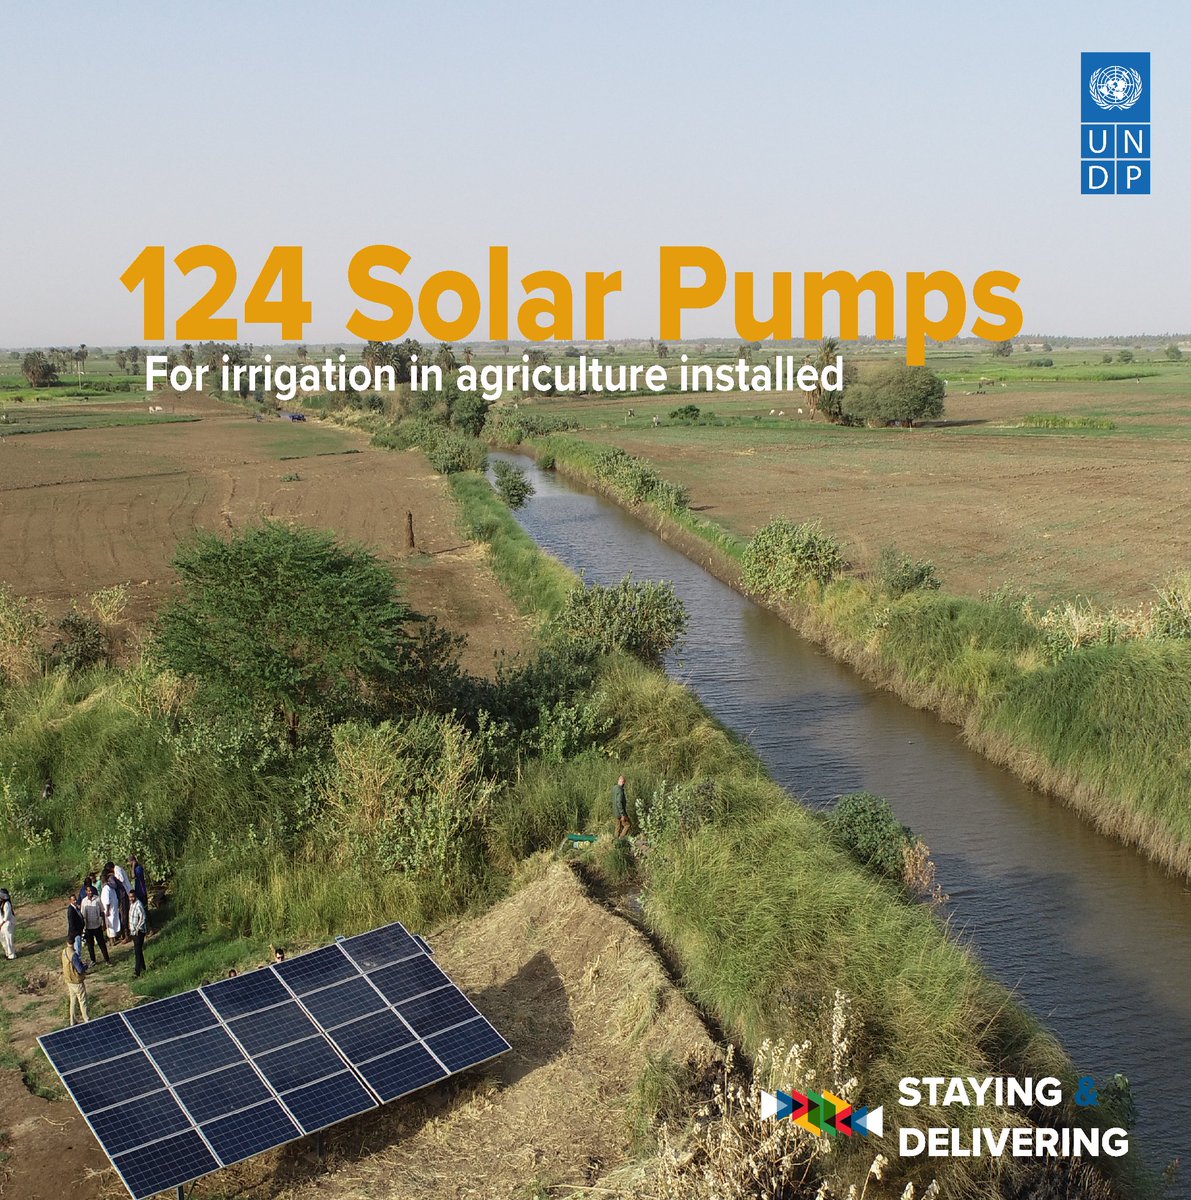 Power supply disruptions and the increased cost of fuel have severely restricted access to basic services across #Sudan @UNDP is working to sustain access to energy across the country since the outbreak of conflict. #StayingAndDelivering